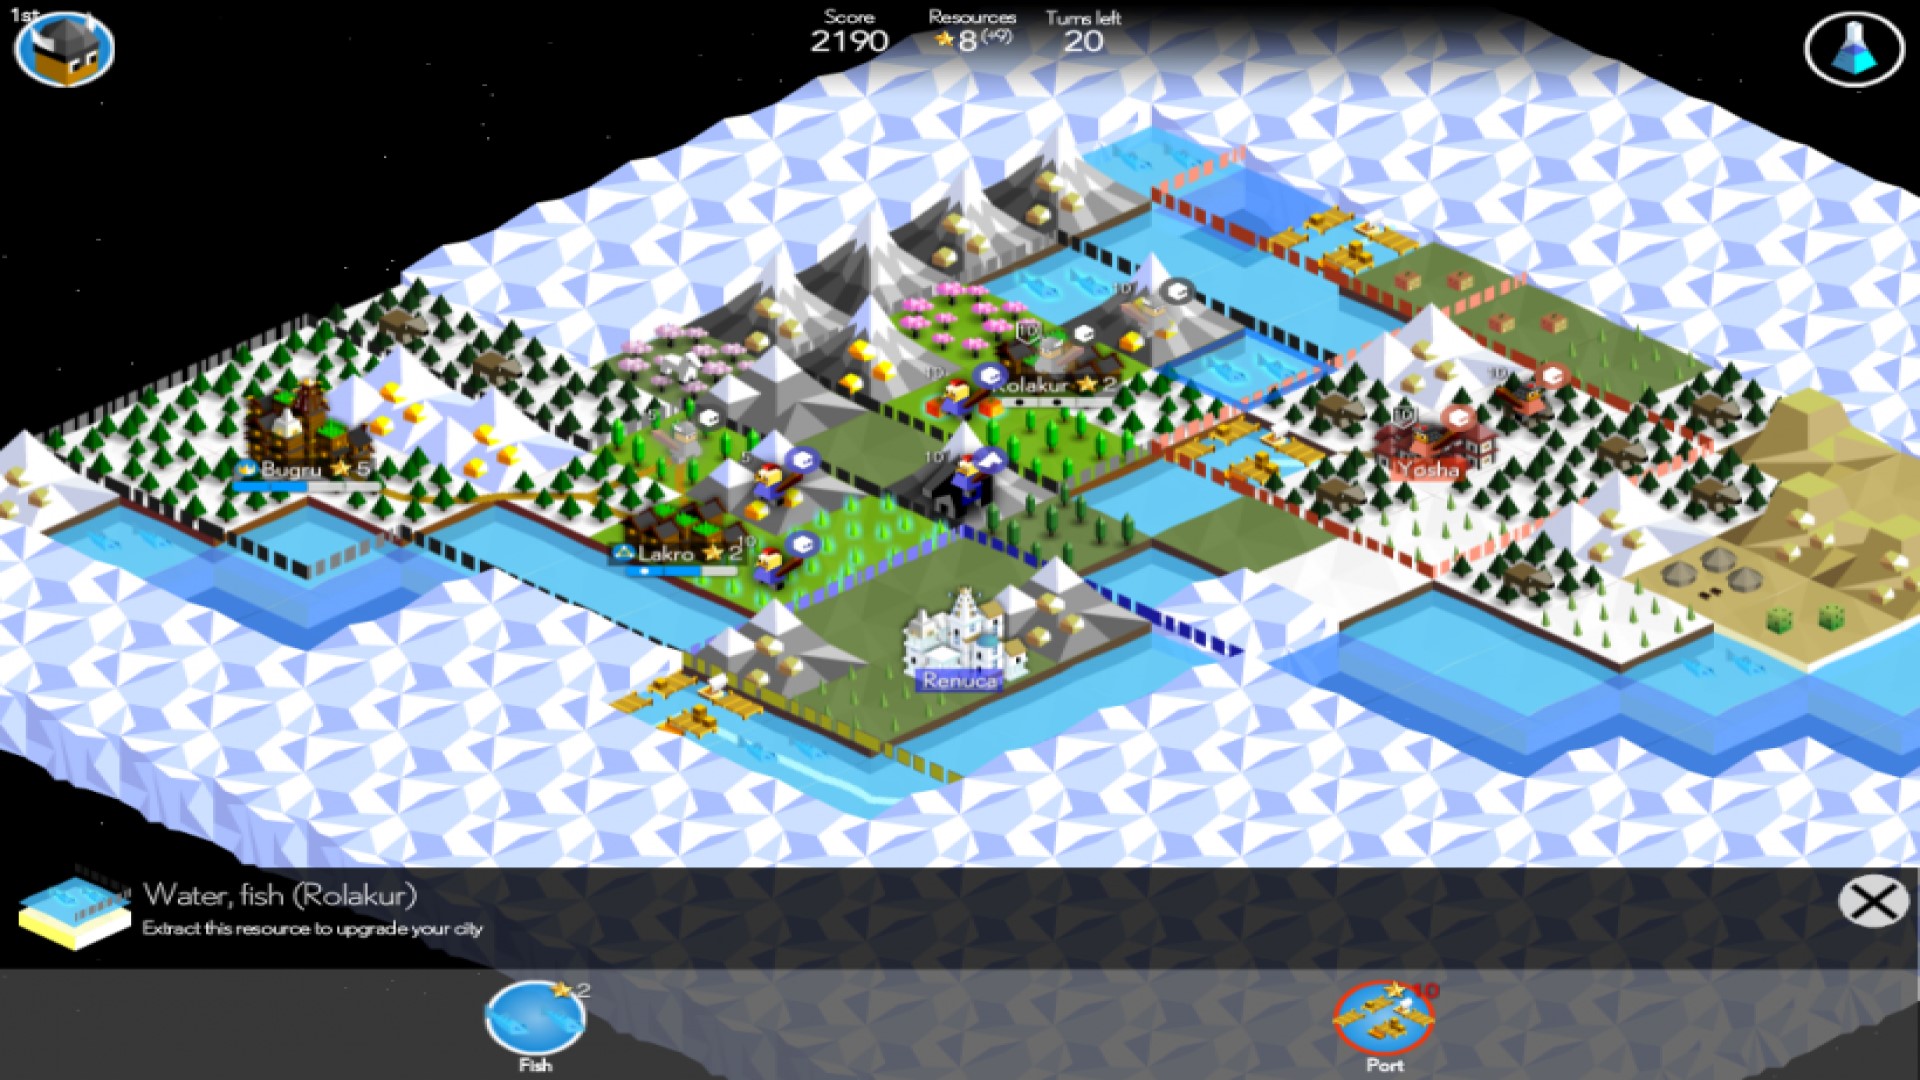 Best mobile strategy games: Polytopia. Imagge shows a colourful map of snowy mountains and countryside.